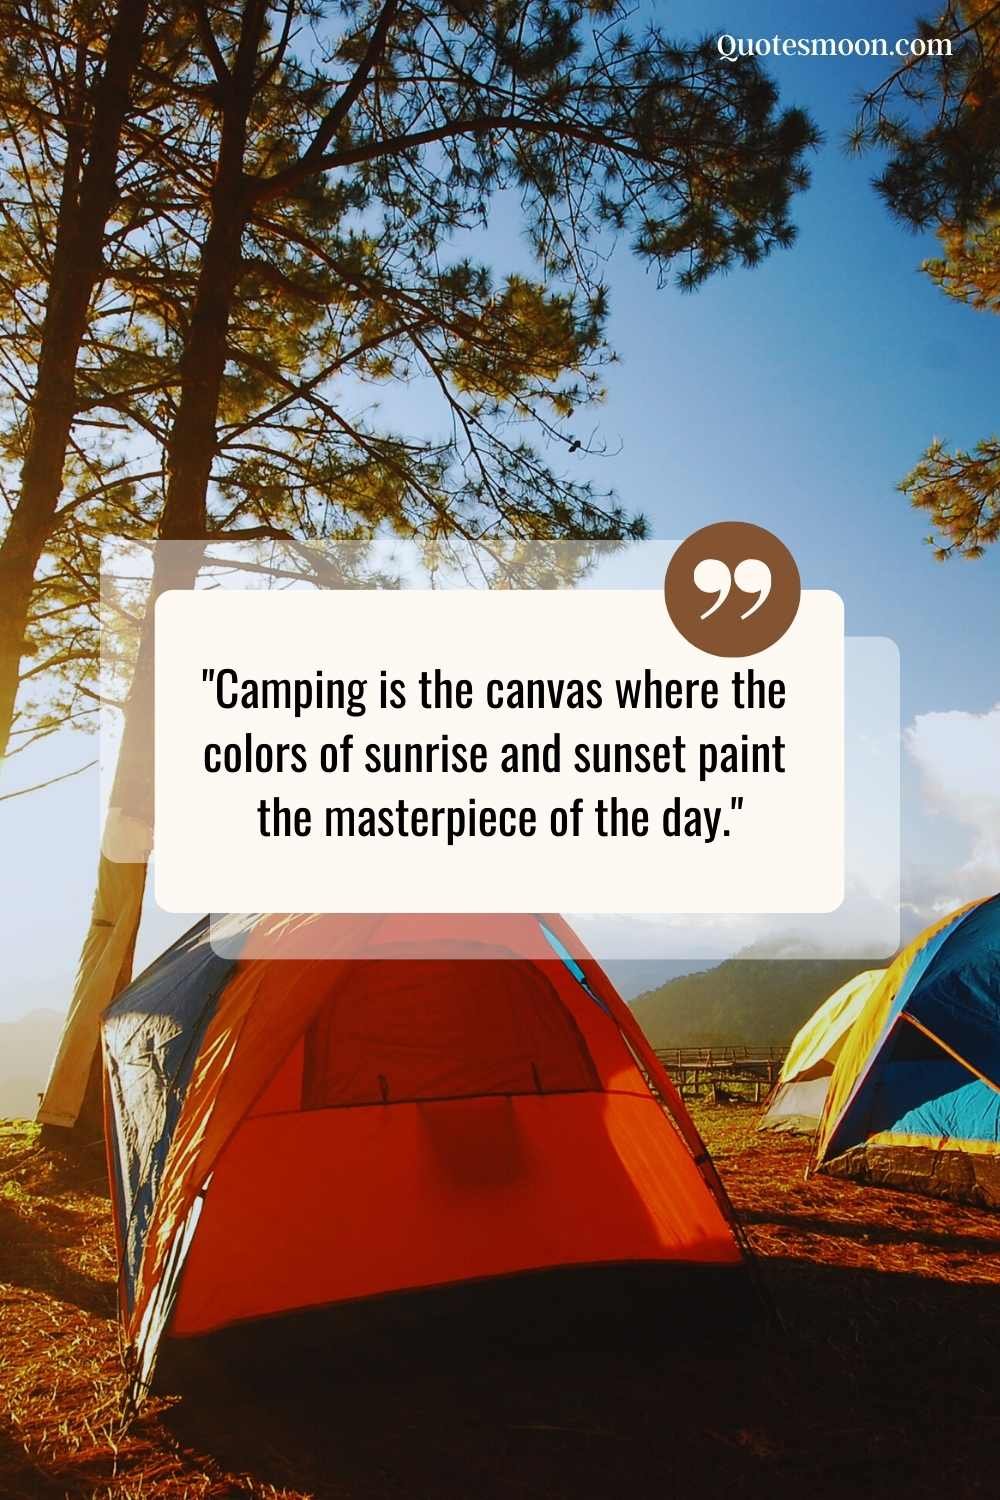 Summer Camp Photo quotes to Let Nature Shine